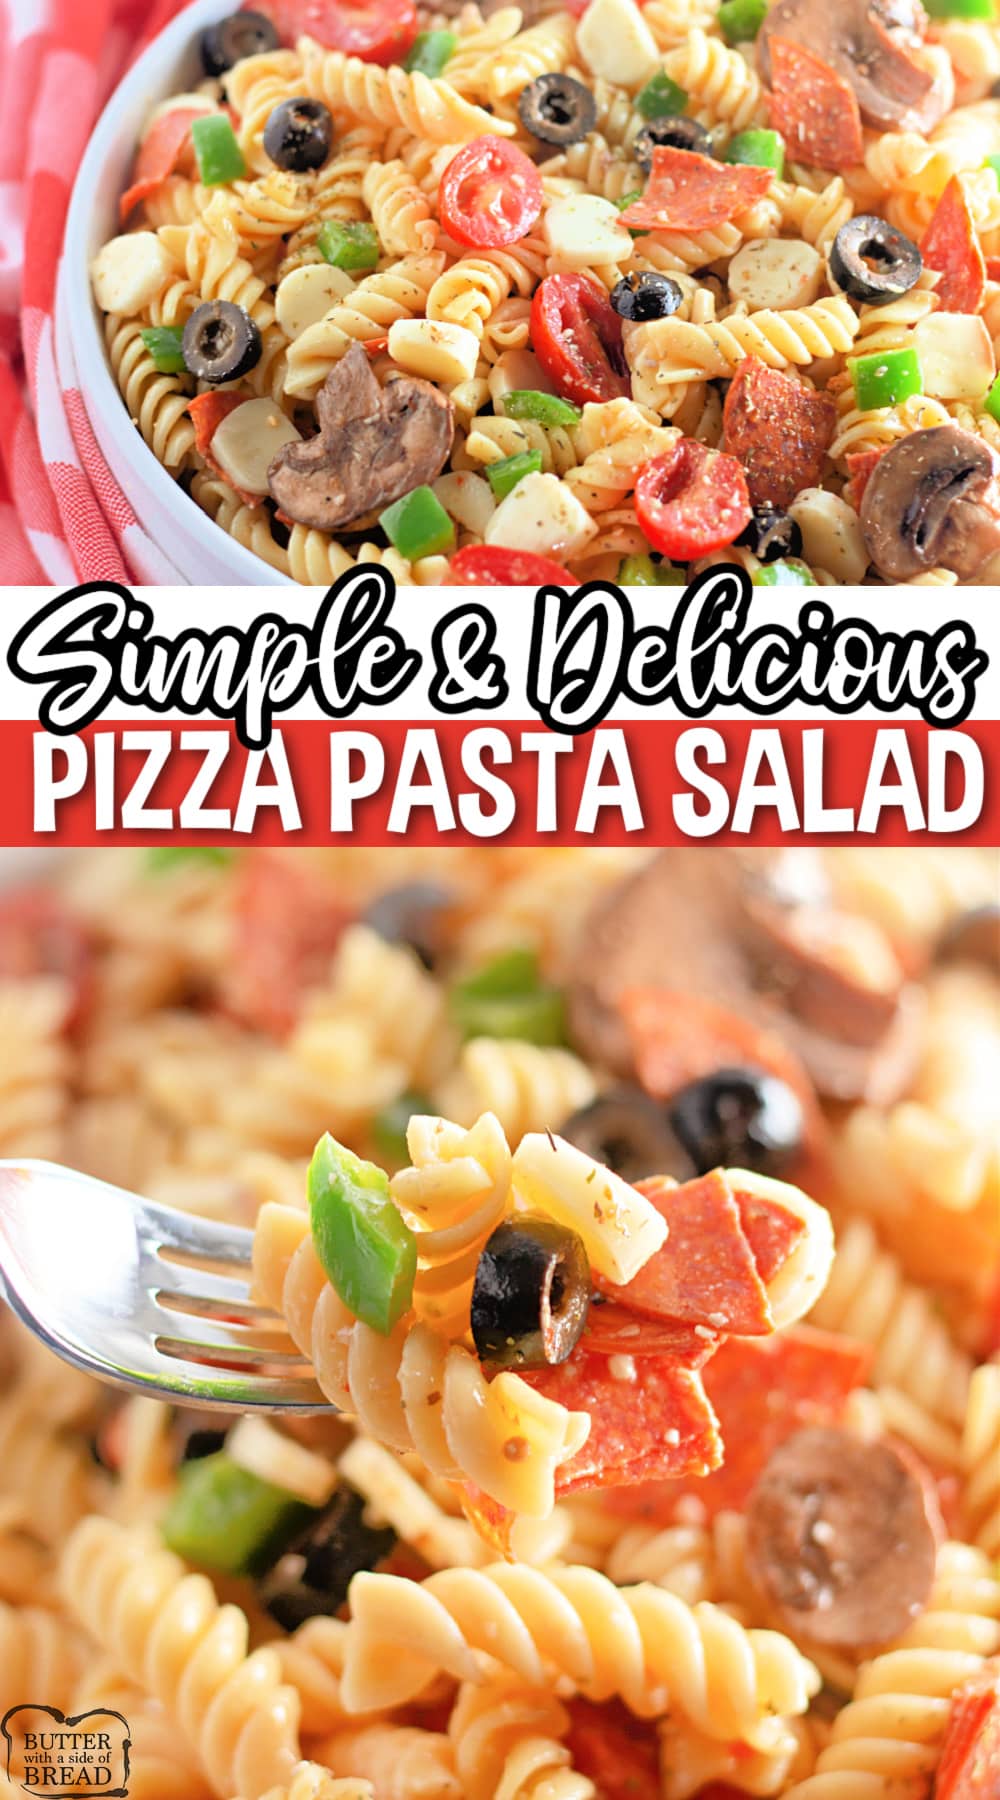 Pizza Pasta Salad is easy to make and full of pepperoni, mozzarella cheese, olives and all of your other favorite pizza toppings. This cold pasta salad recipe is perfect for parties and potlucks or even just a simple weeknight dinner. 